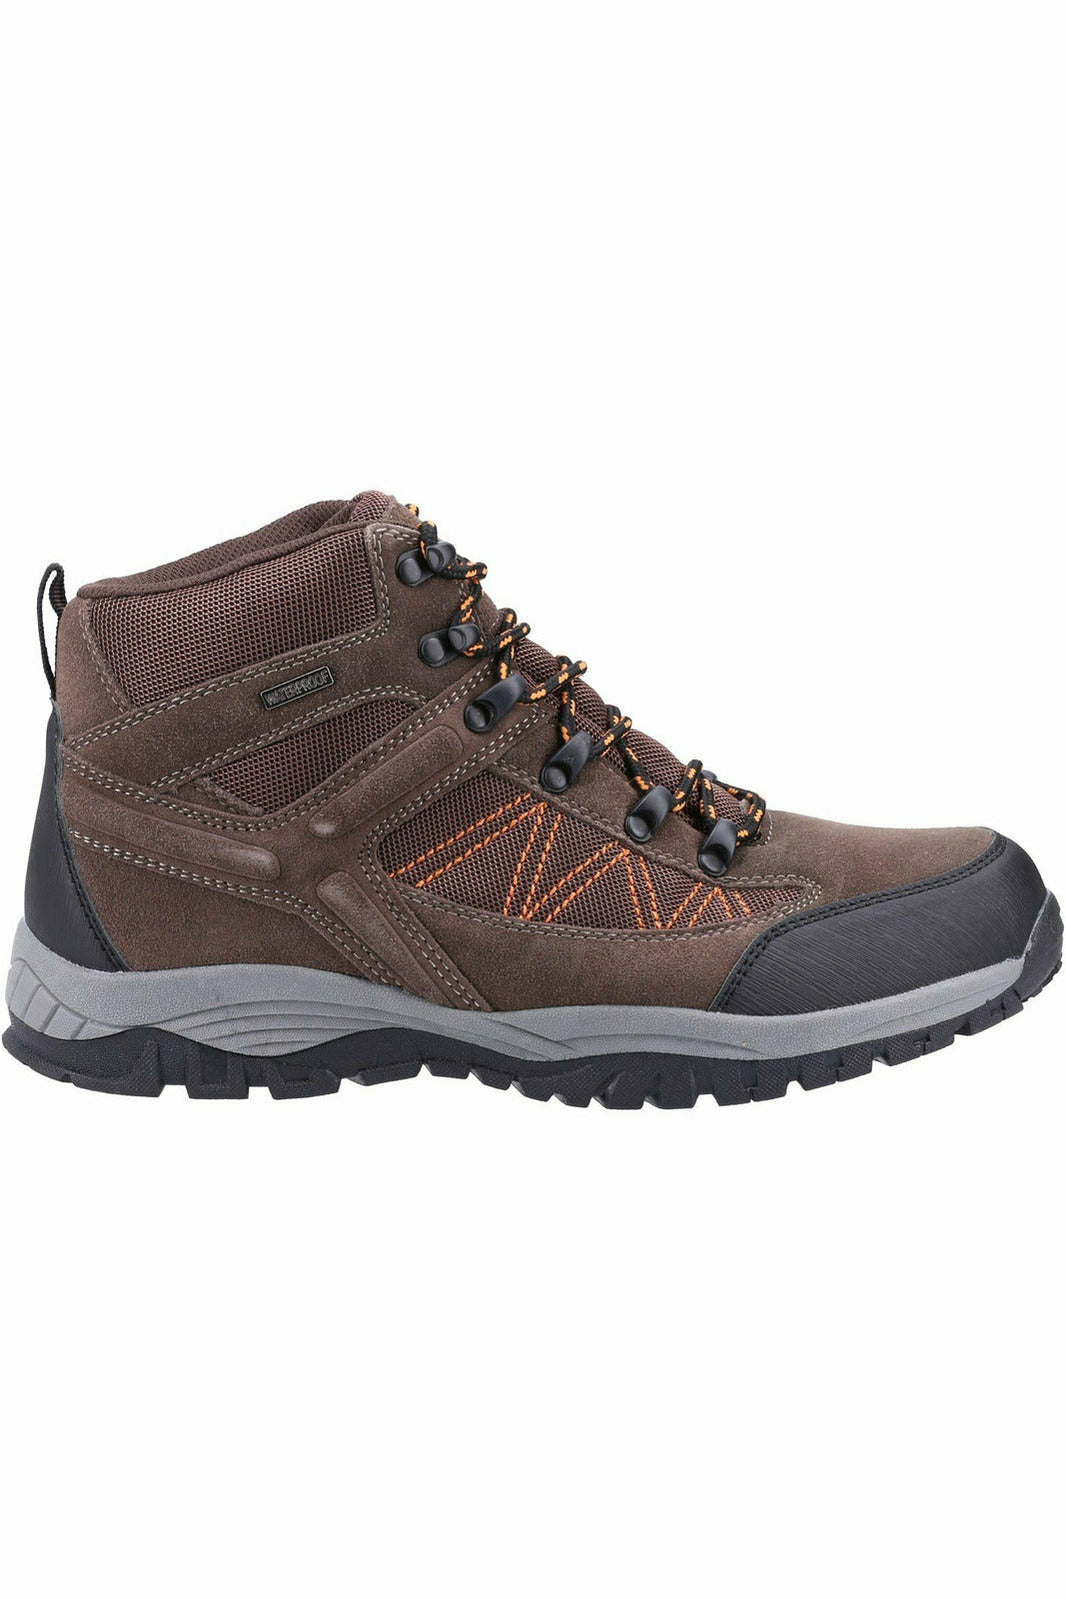 Cotswold - Maisemore Mens Hiking Boot